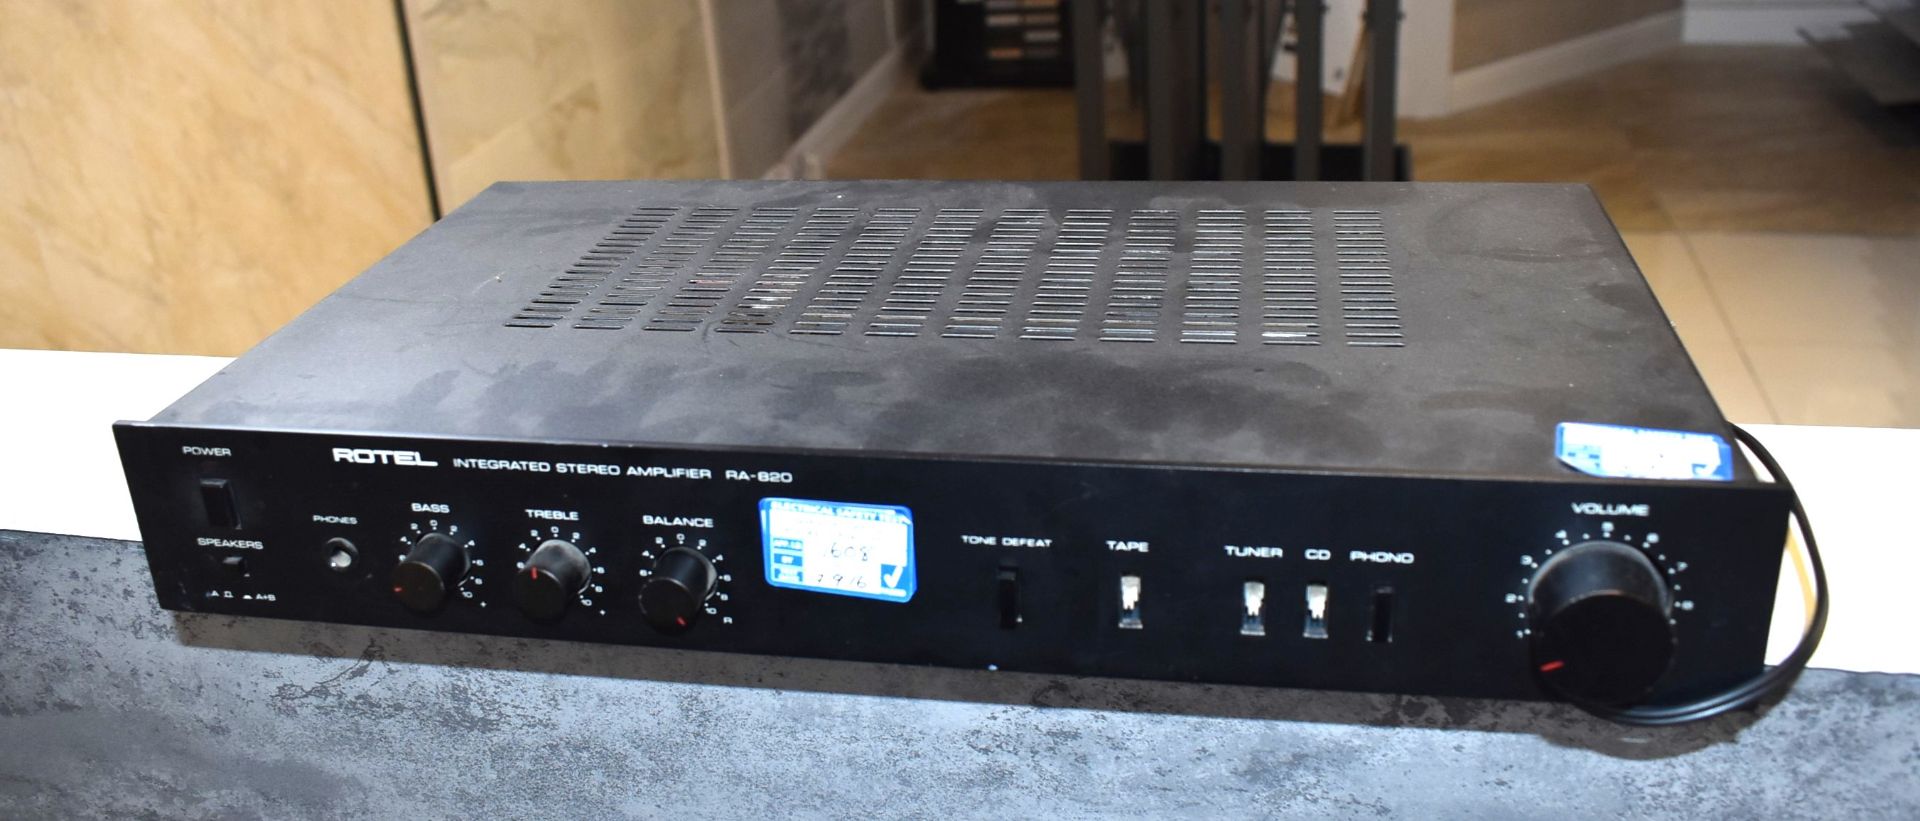 1 x Rotel Integrated Stereo Amp With Four Speakers - Model RA-820